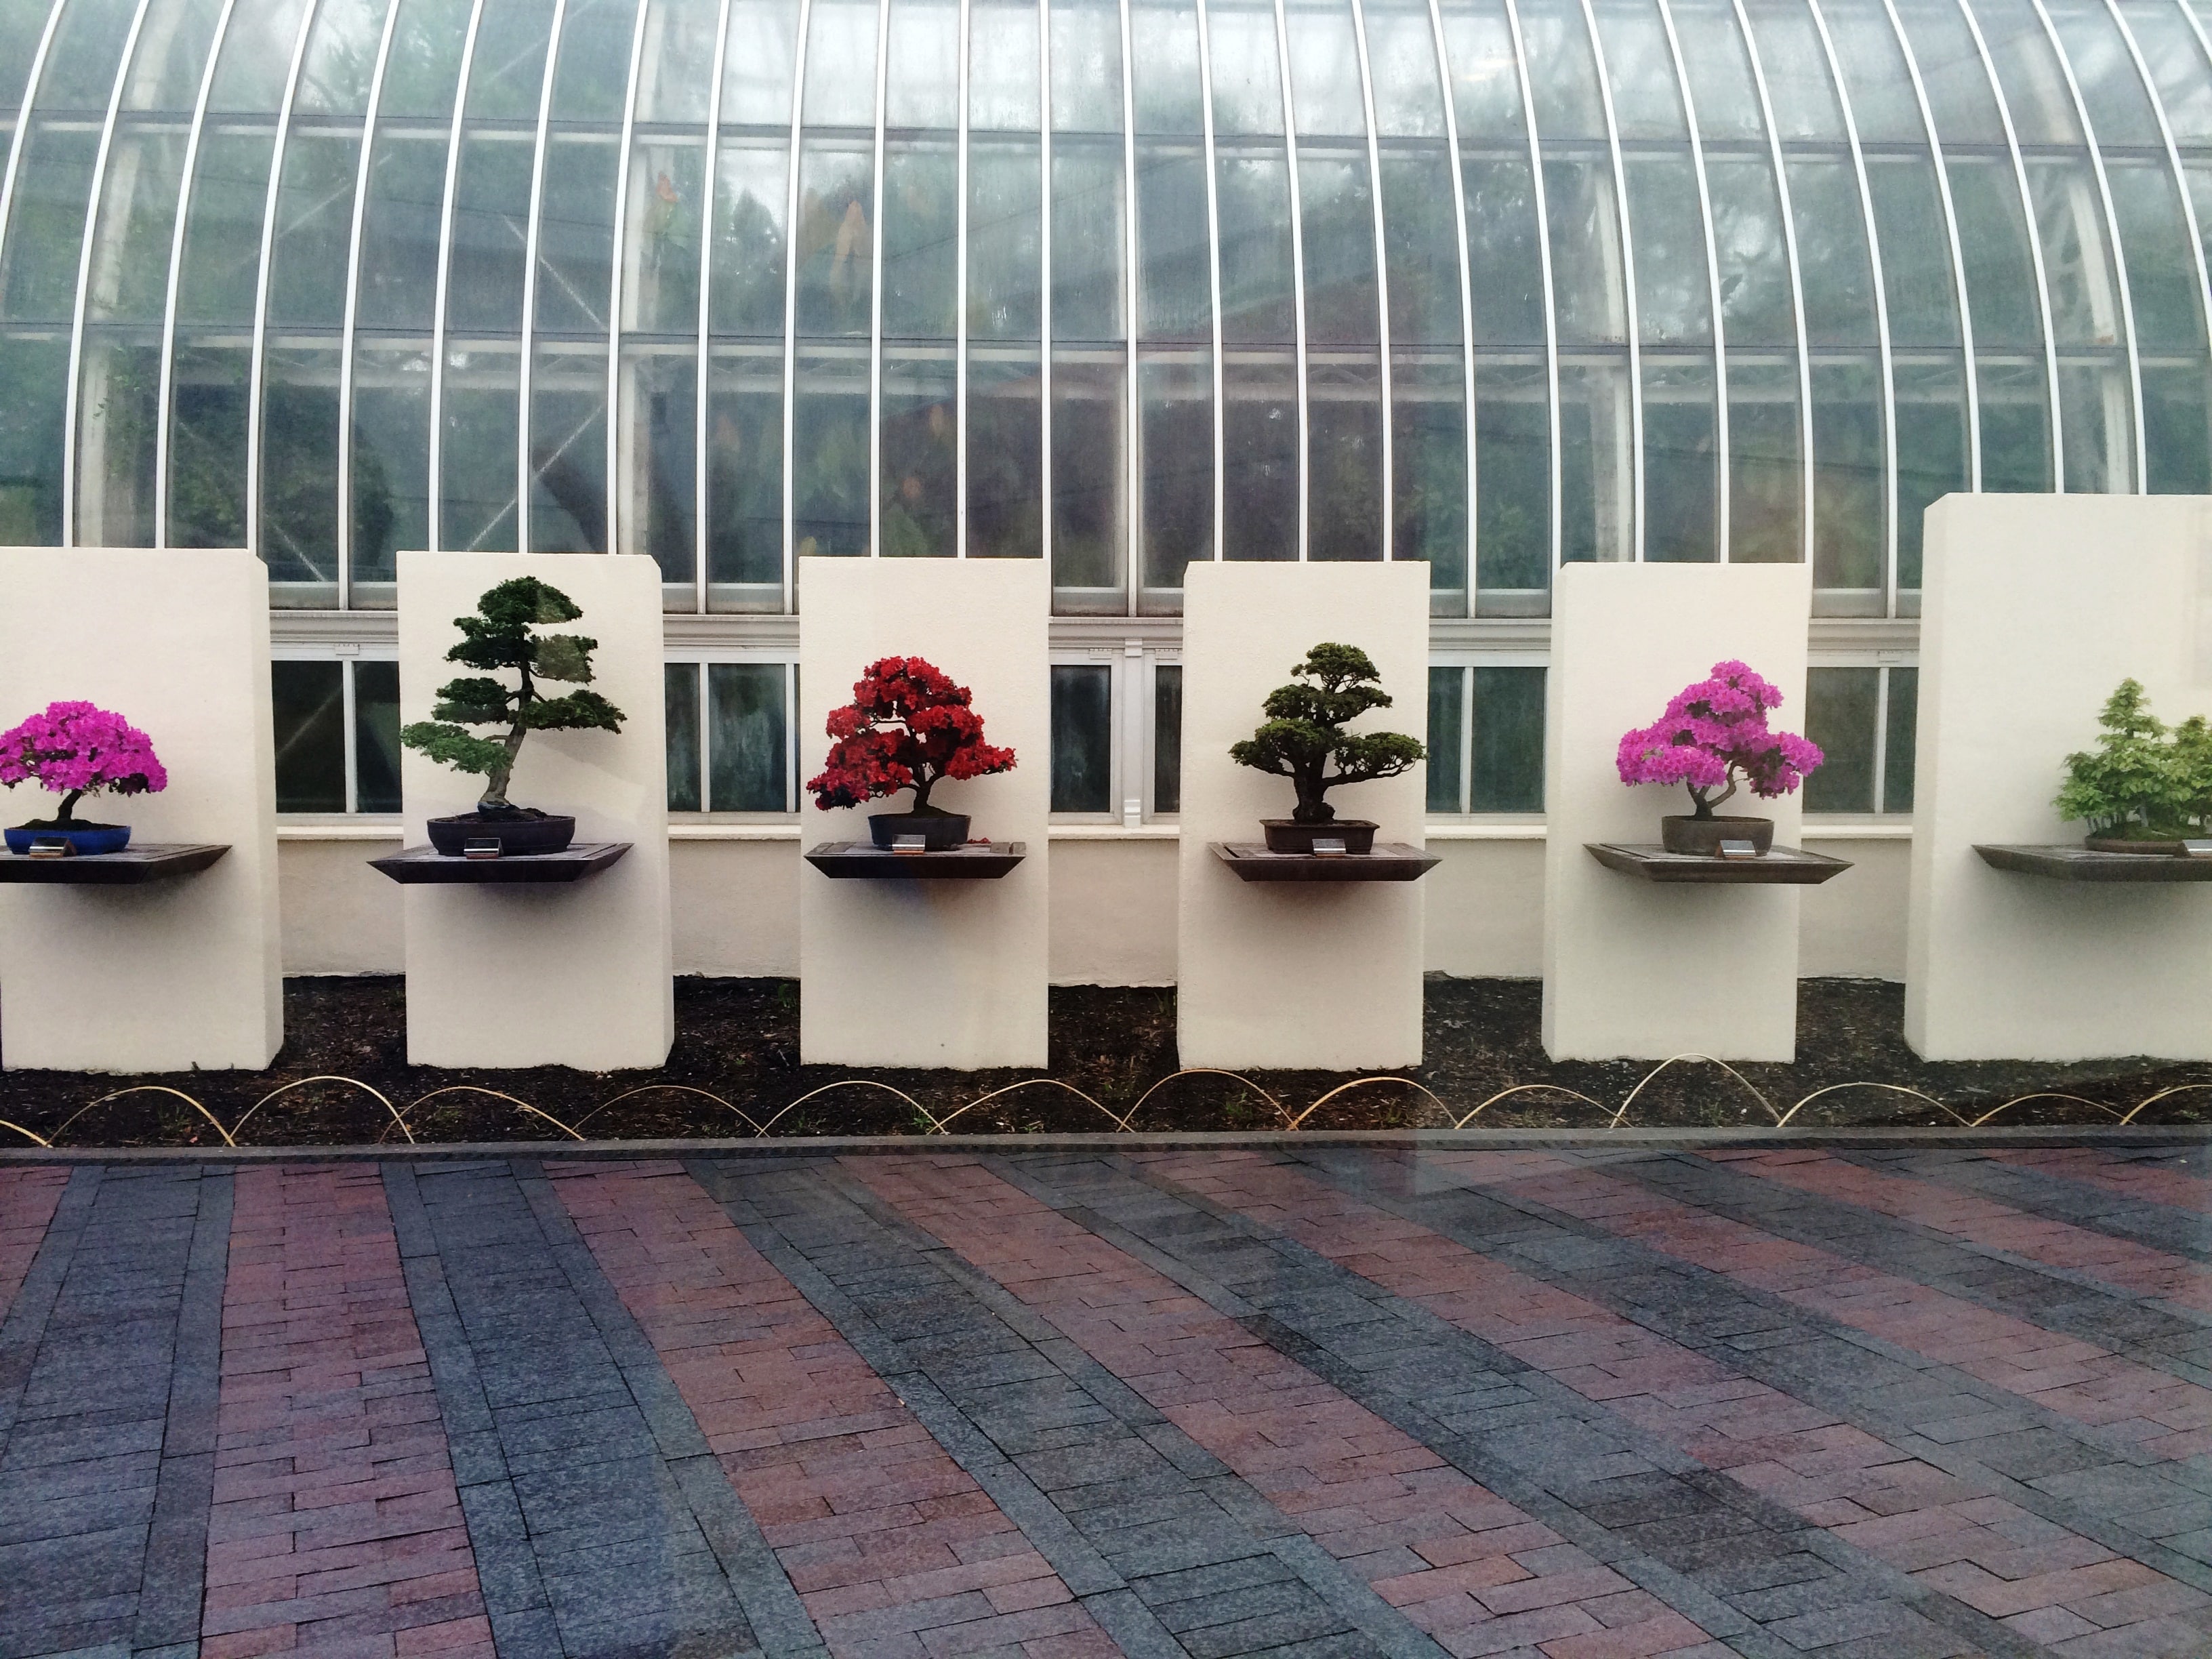 6 bonsai trees in a rom, all on separate platforms. Large glass structure behind them